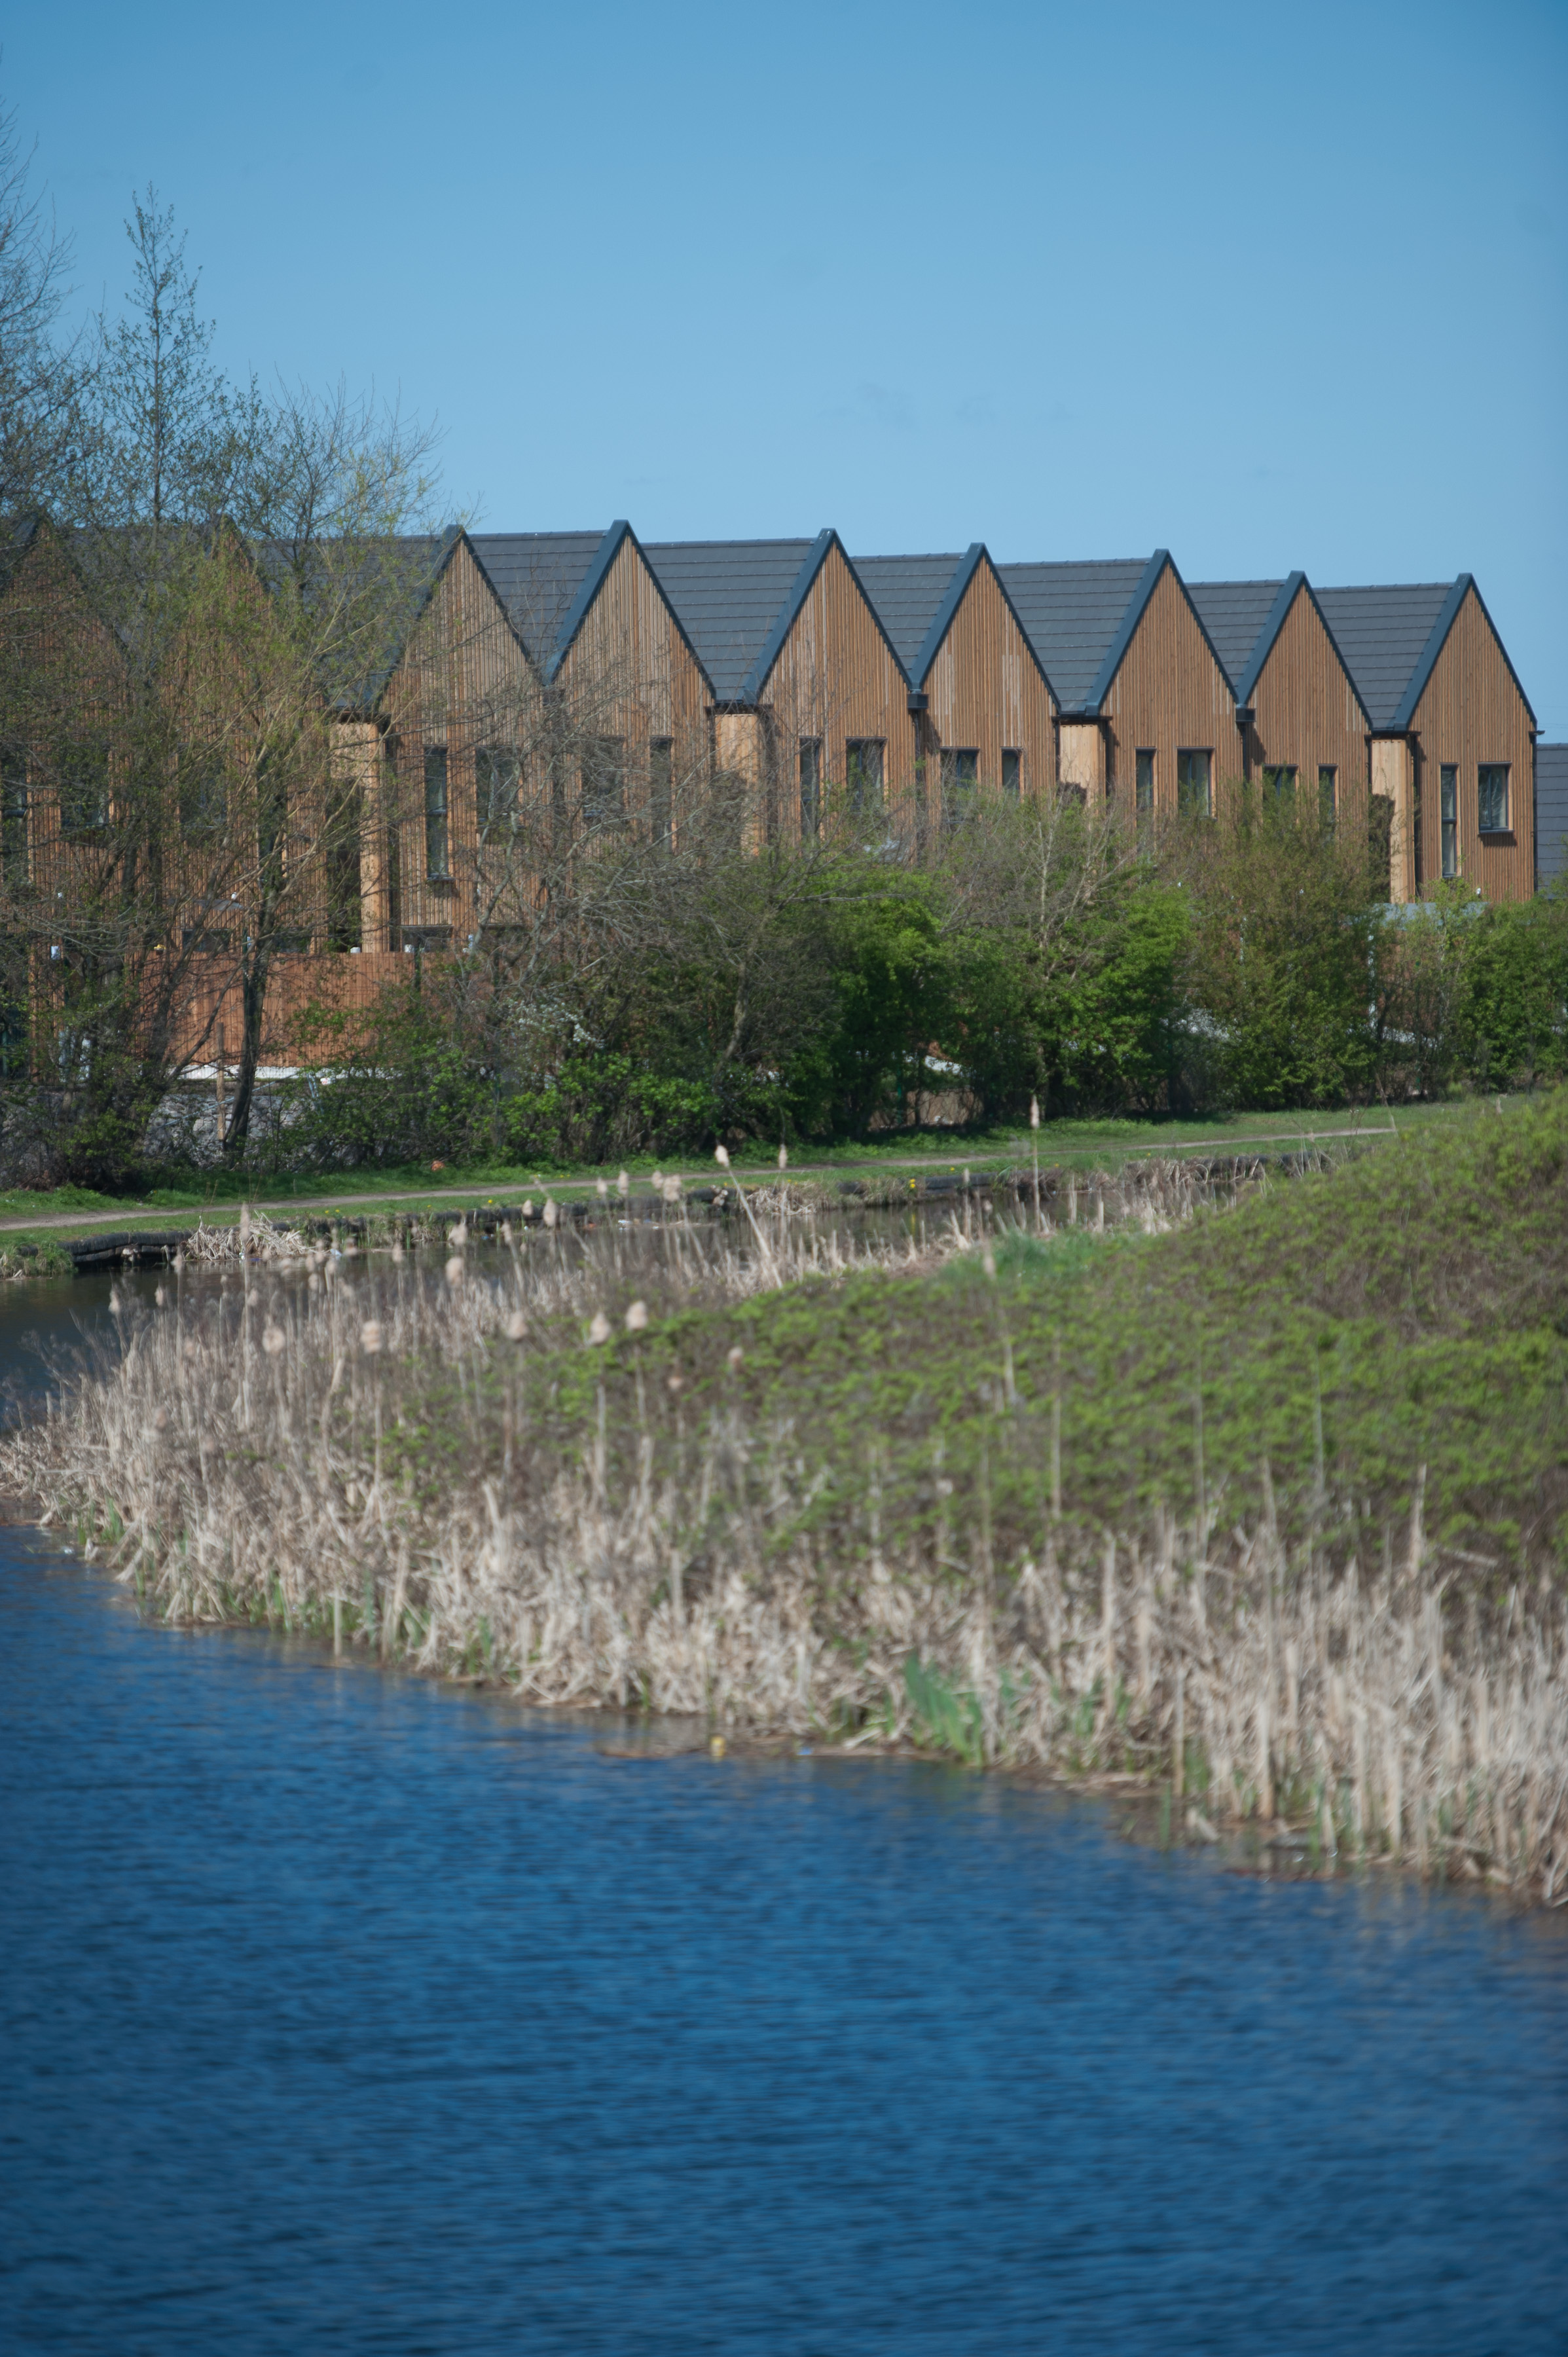 The Beechdale Estate in Walsall includes good quality, affordable housing